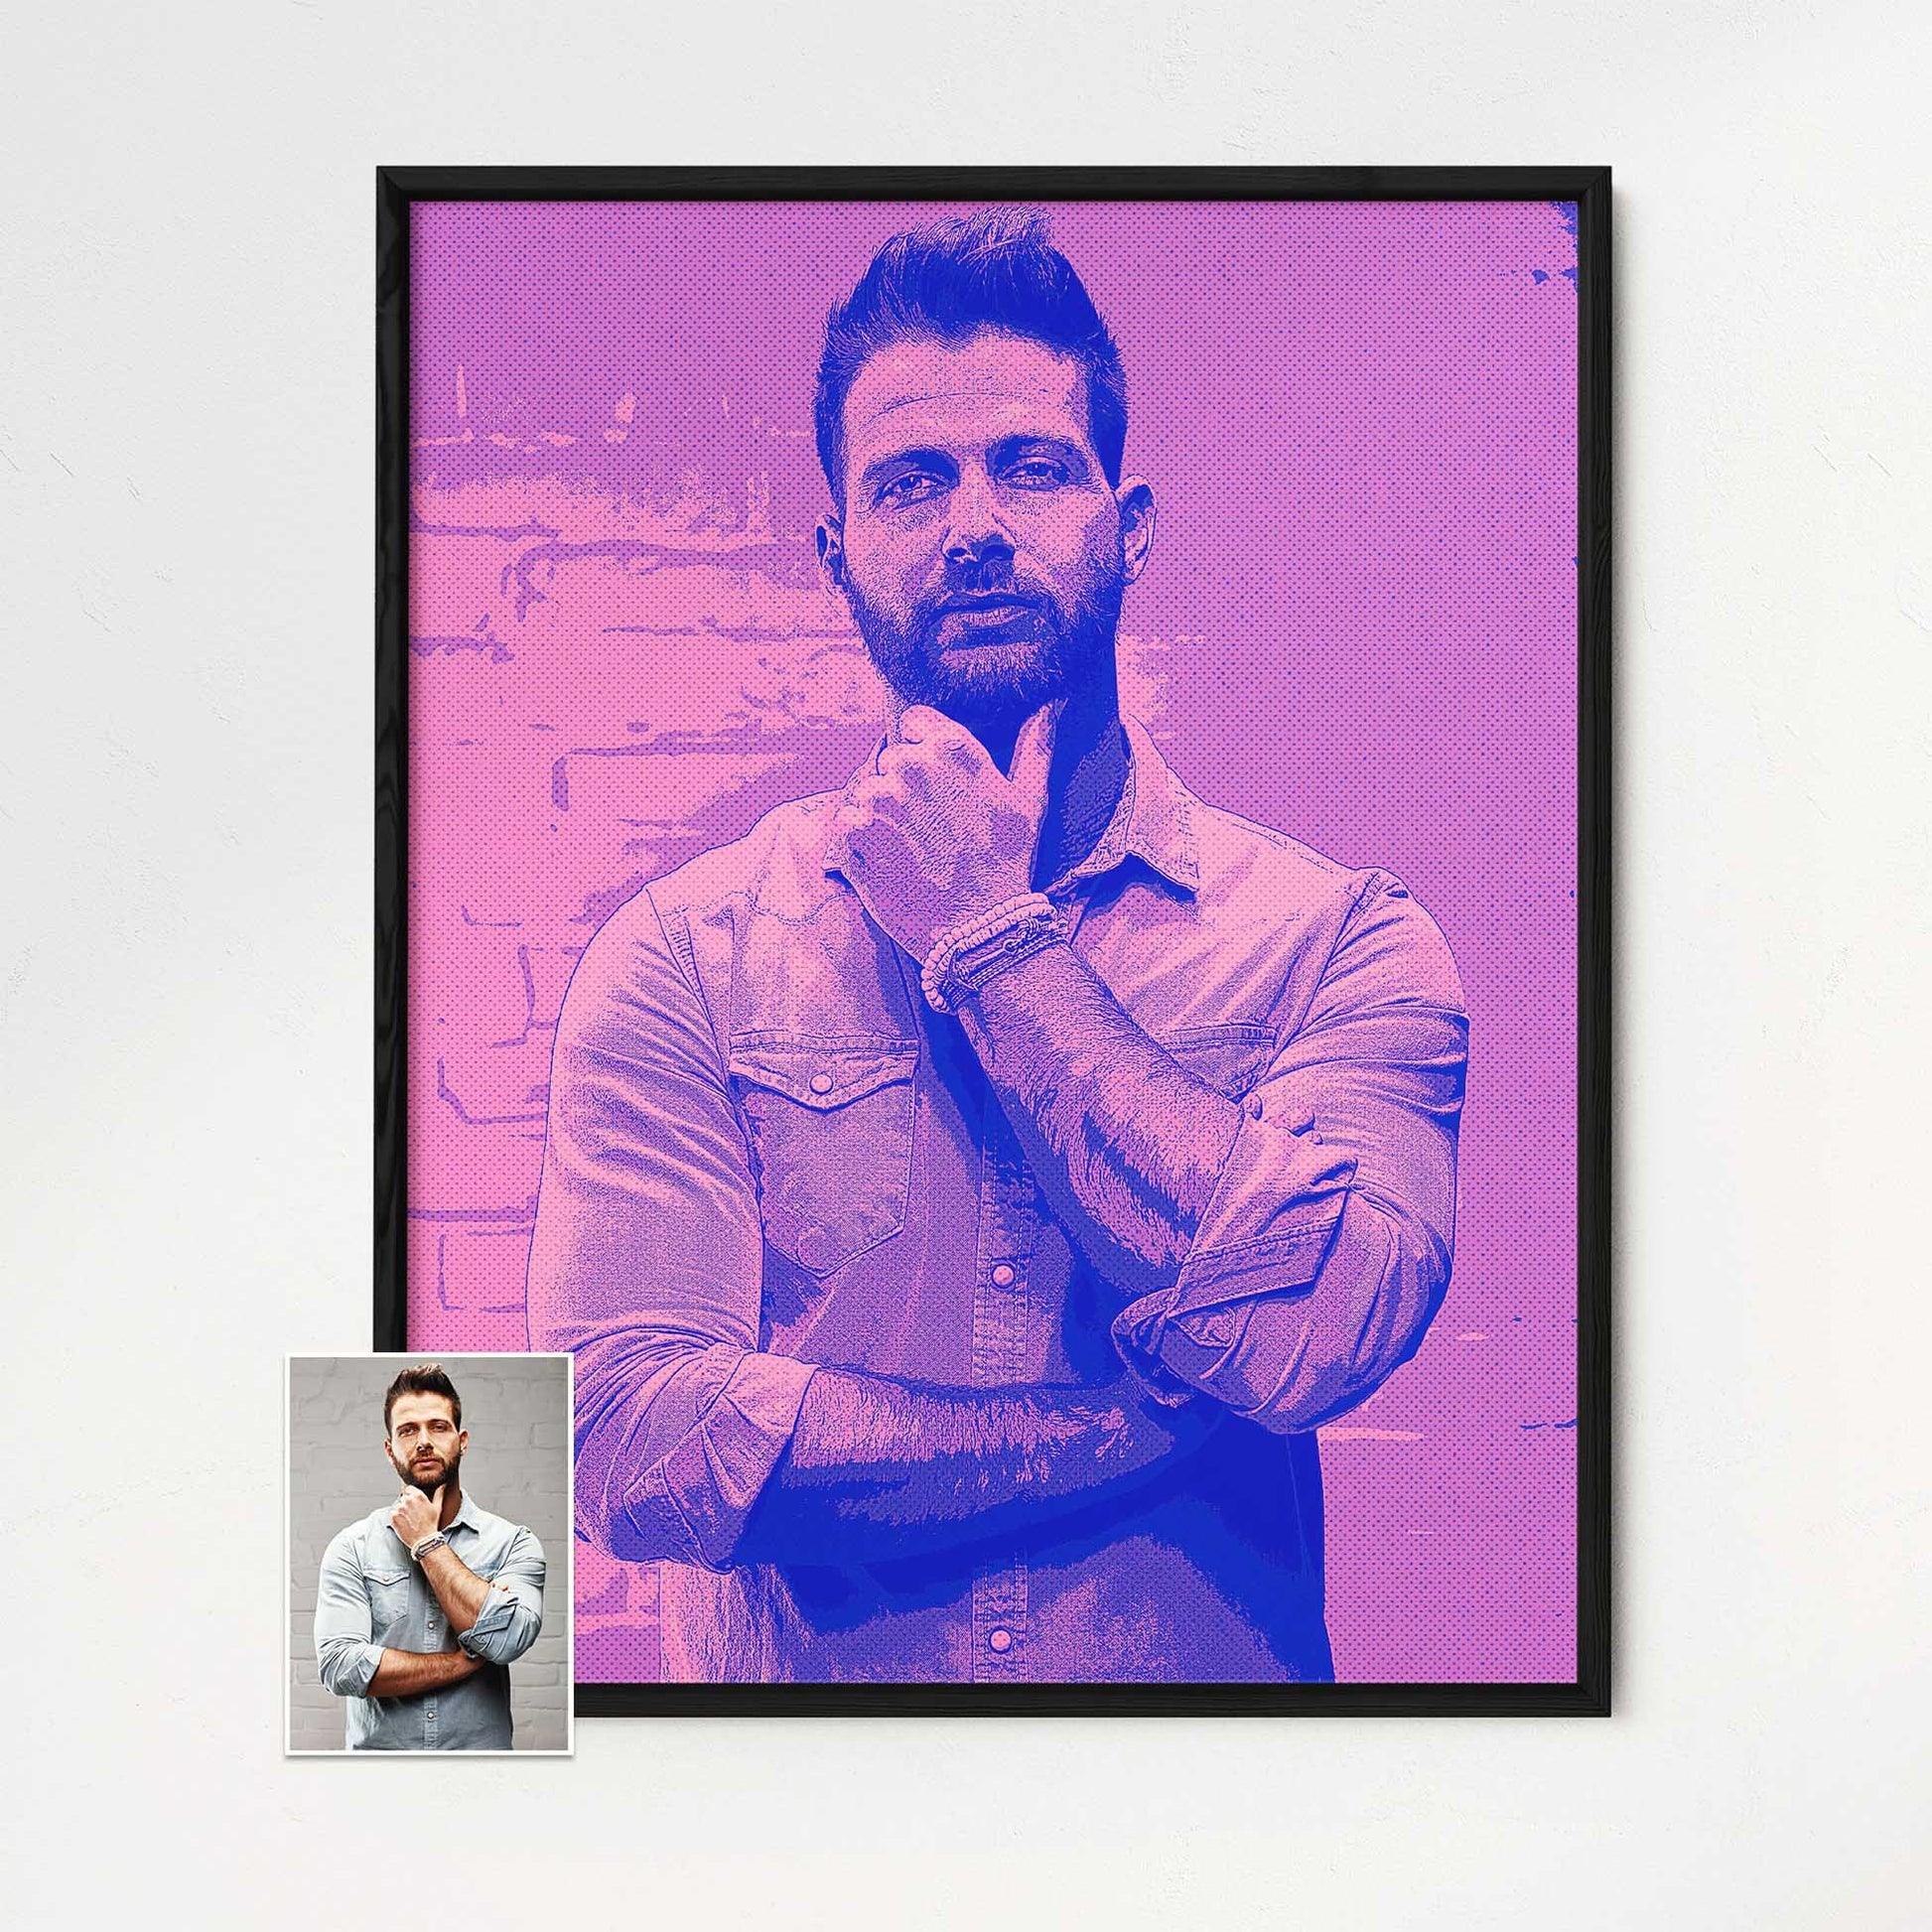 Immerse yourself in the world of artistry with our Personalised Colourful Drawing Framed Print. This exceptional artwork, crafted from a photo, showcases a pencil effect that adds a unique and fresh perspective, quirky and imaginative 